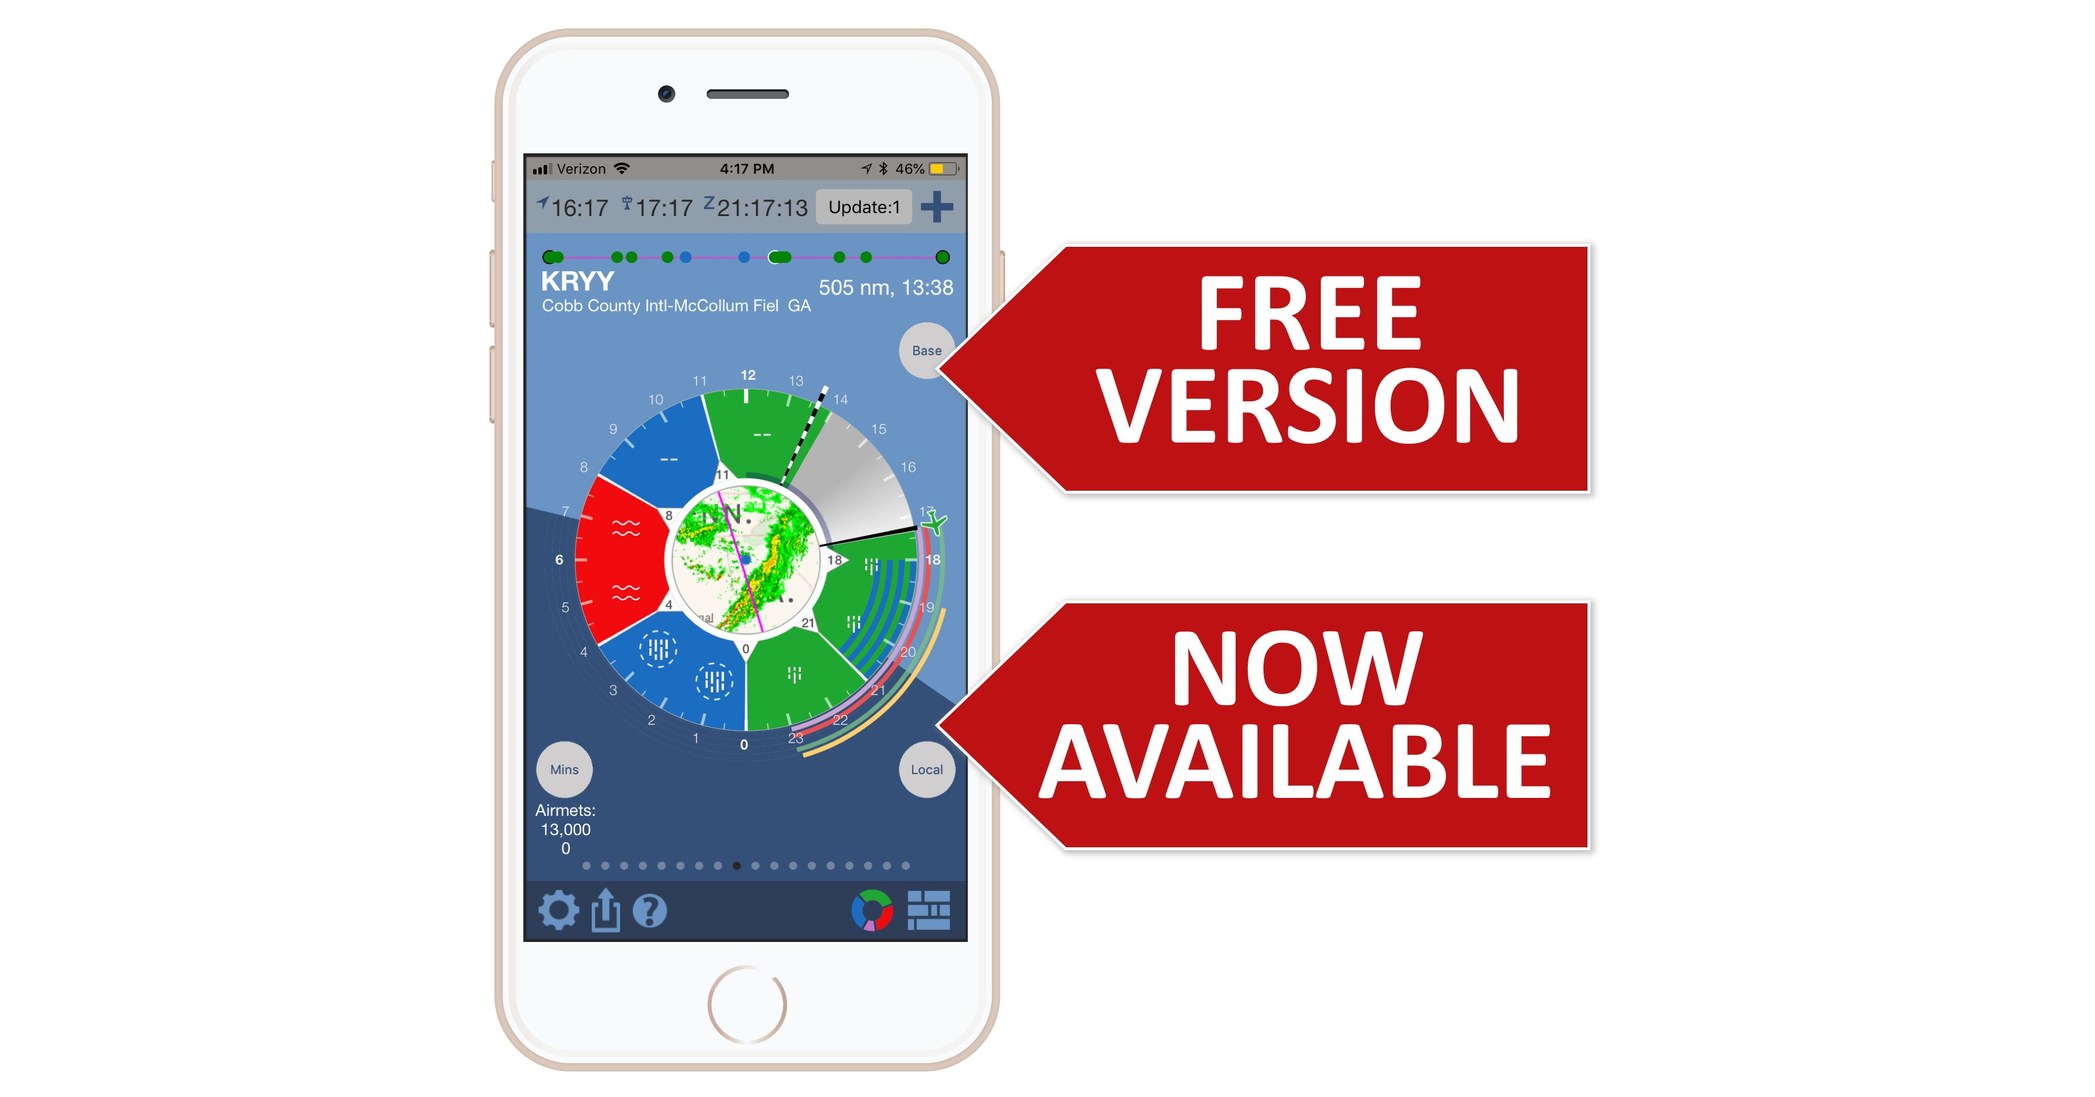 Free Version of Wx24 Pilot Aviation Weather App Now Available